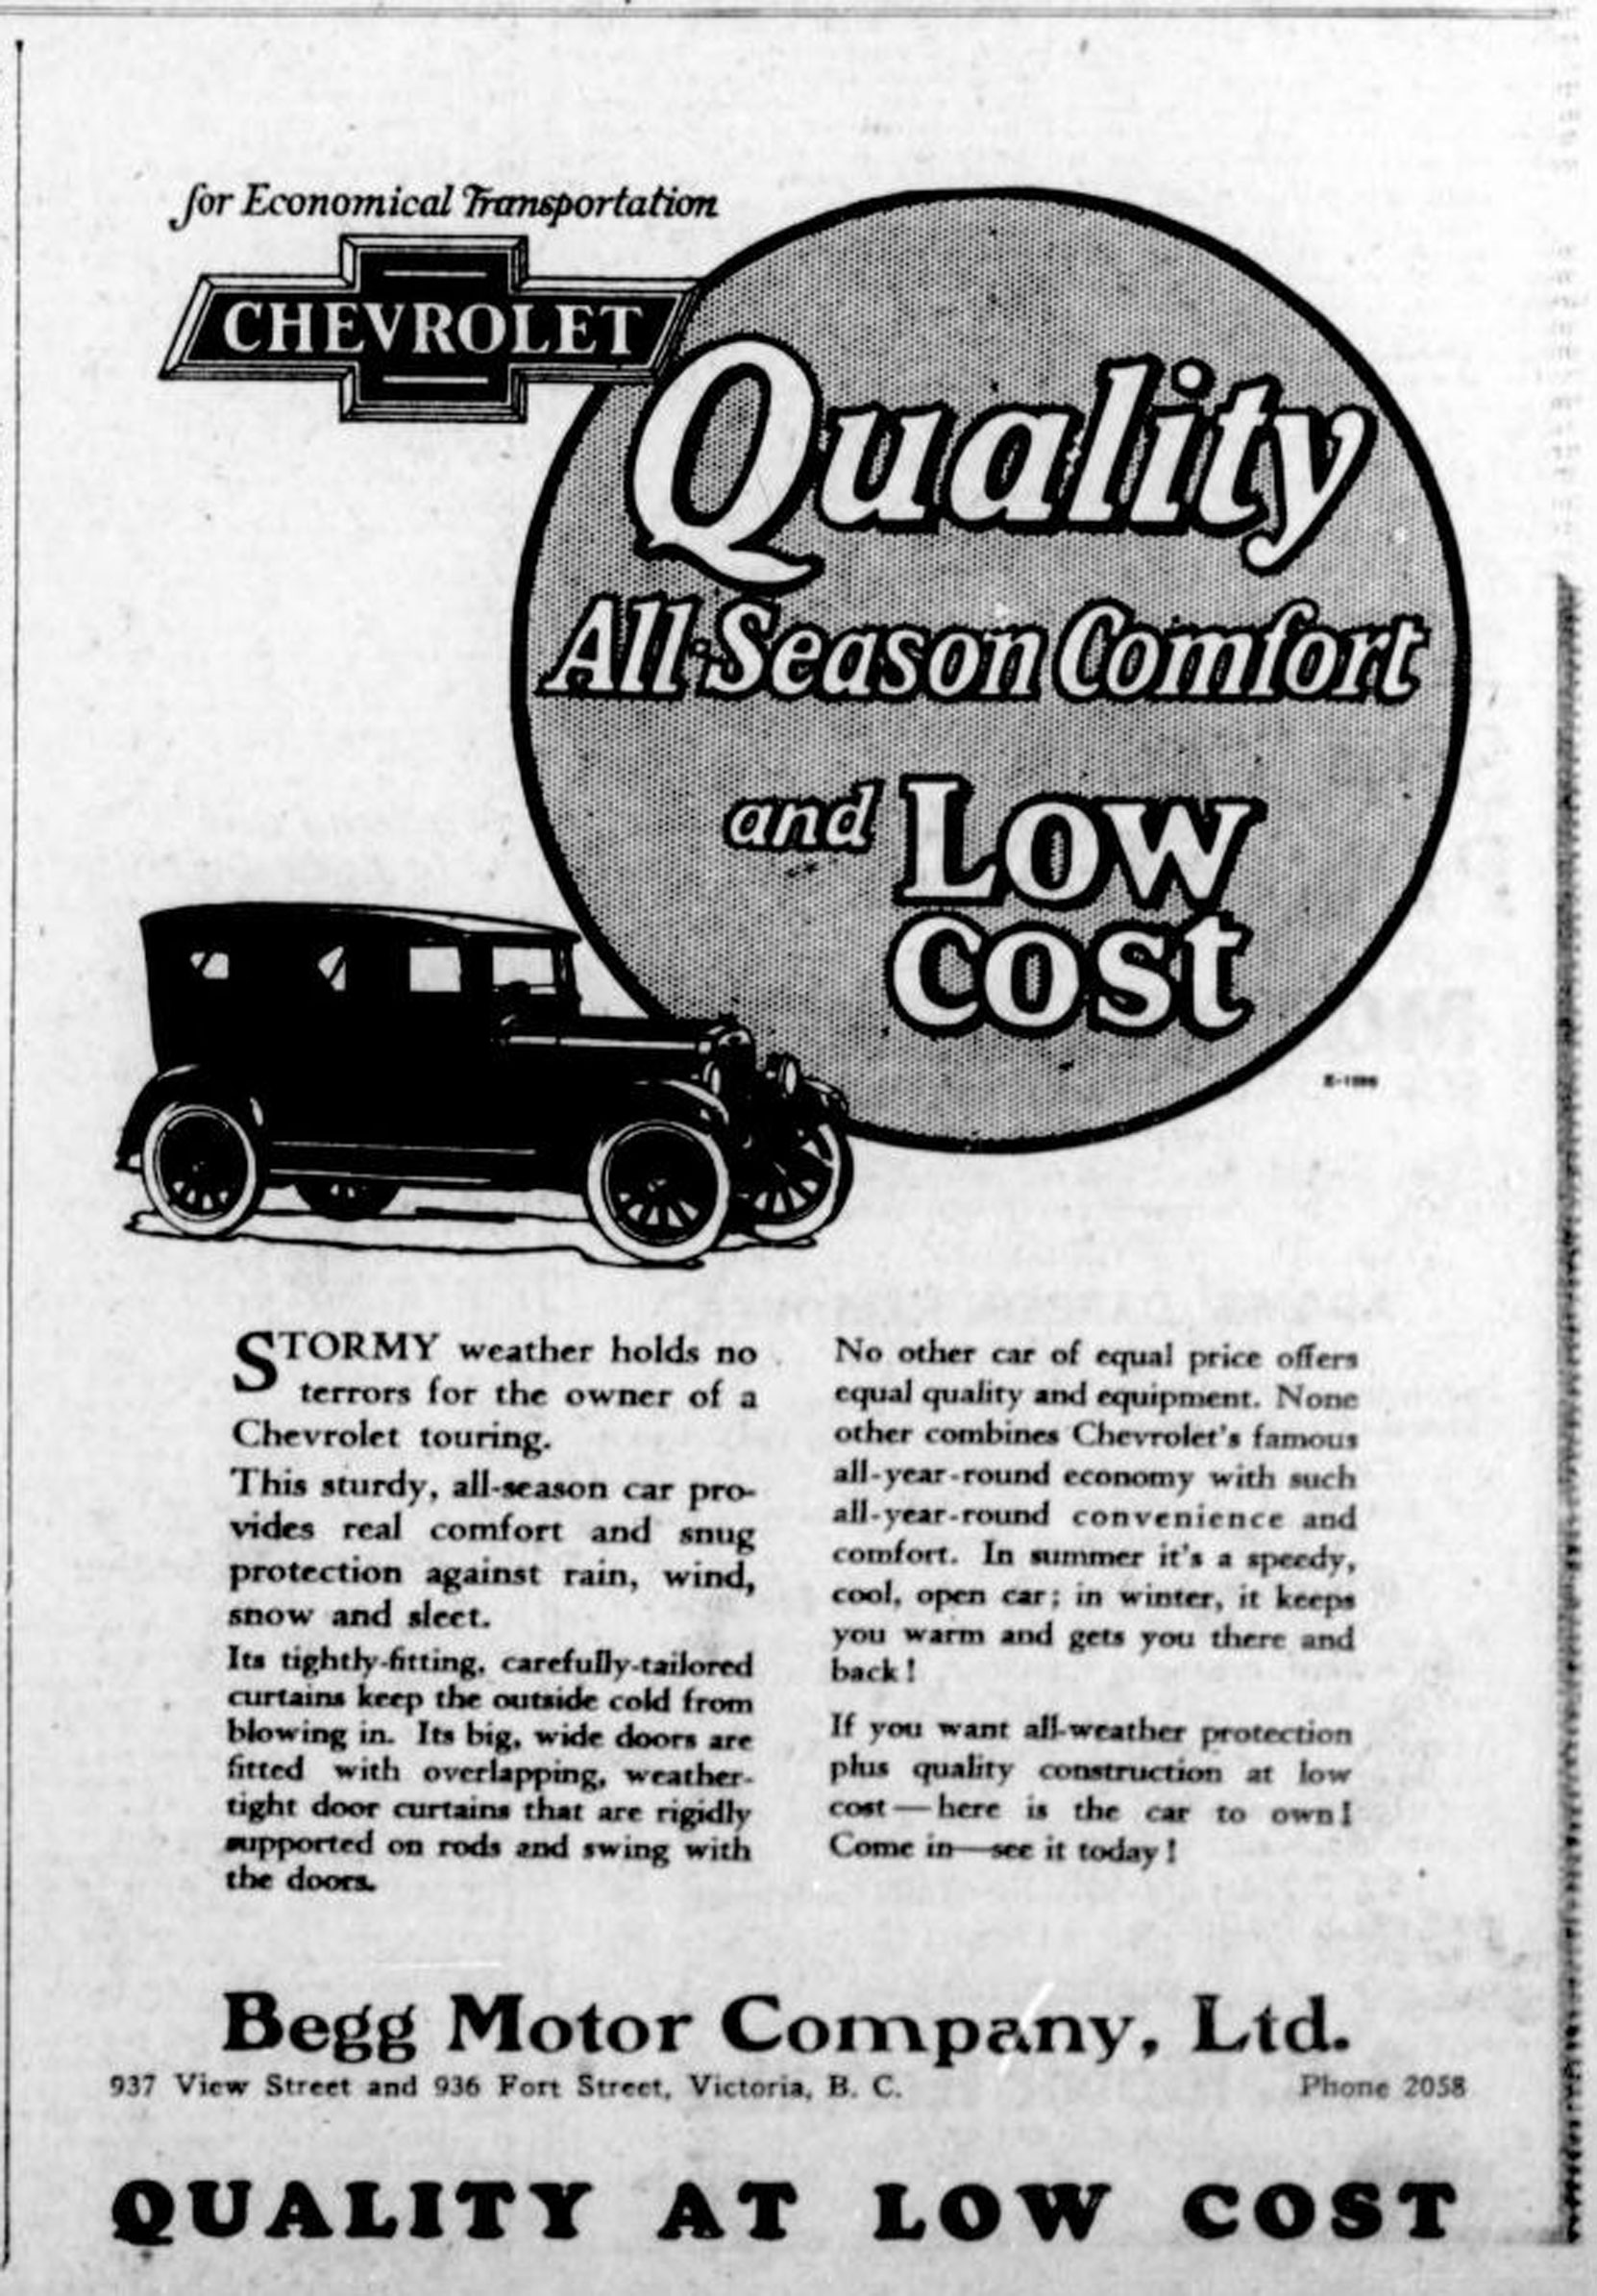 1926 advertisement for Chevrolet automobiles, placed by Begg Motor Company, 937 View Street. This advertisement was placed in the spring of 1926, before Begg Motor Co. opened its new building at 950 Quadra Street. (Victoria Online Sightseeing Tours collection)